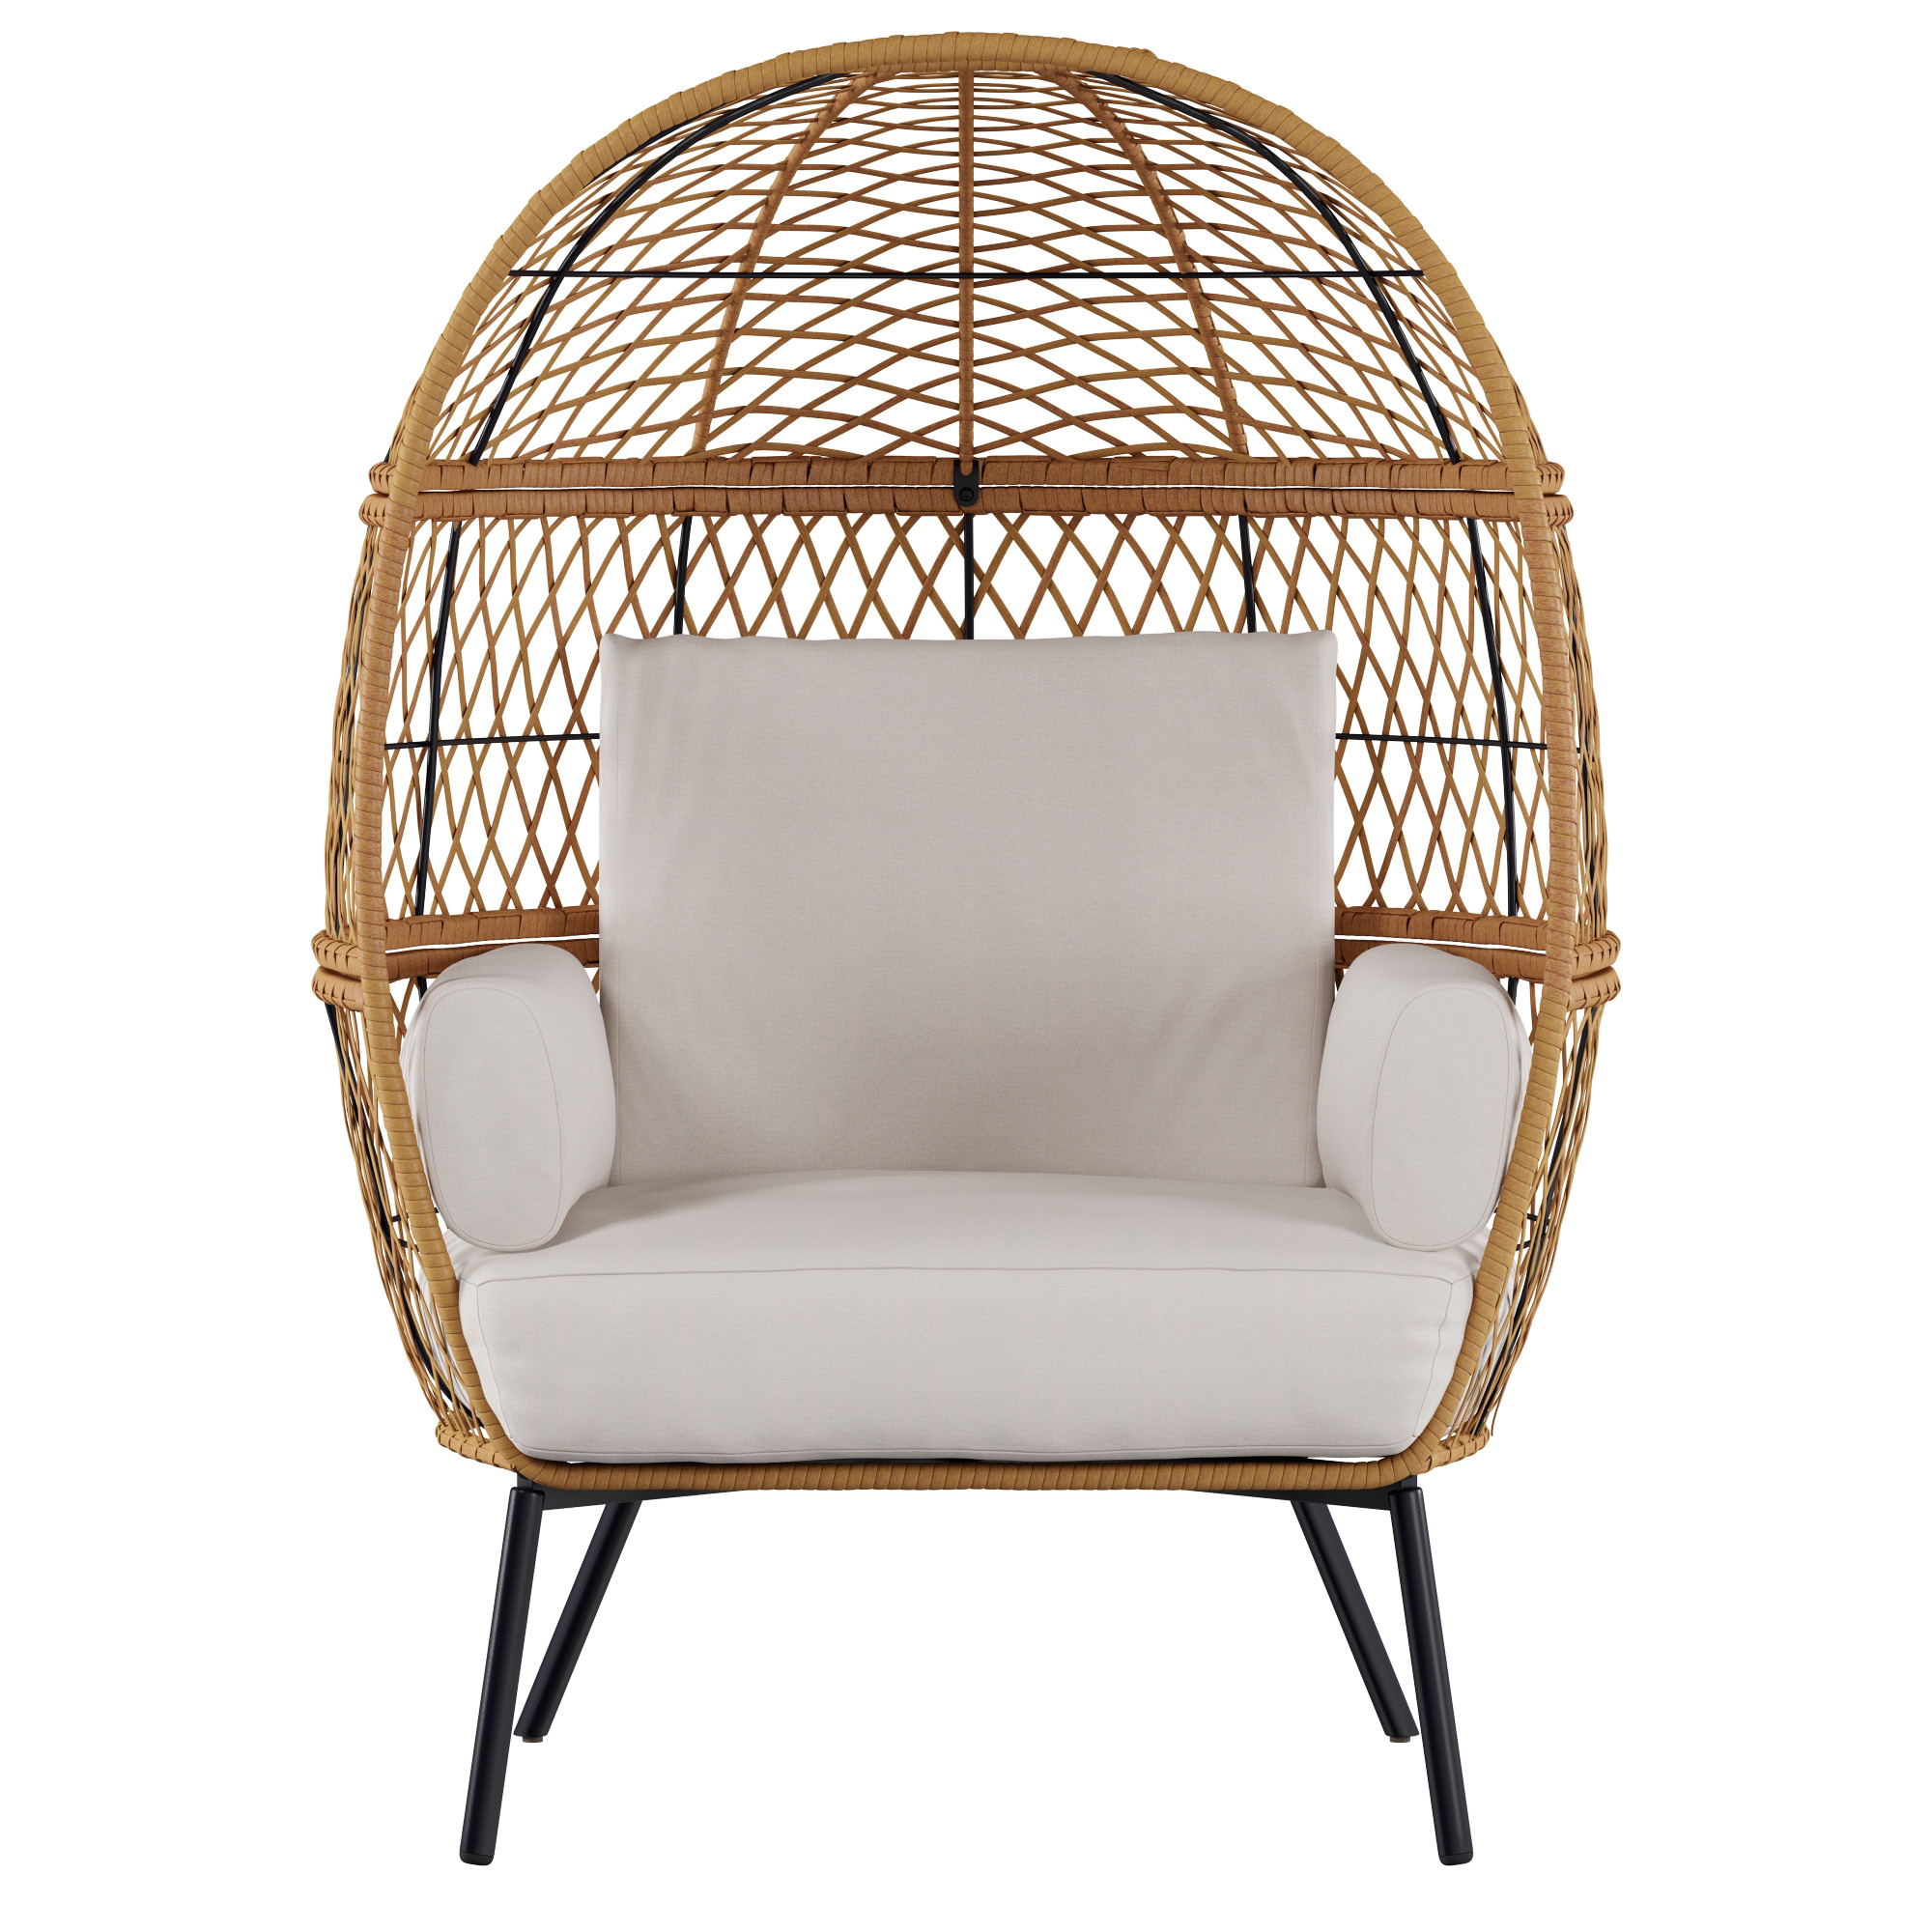 Purchase Boho Egg Chair Up To 70 Off